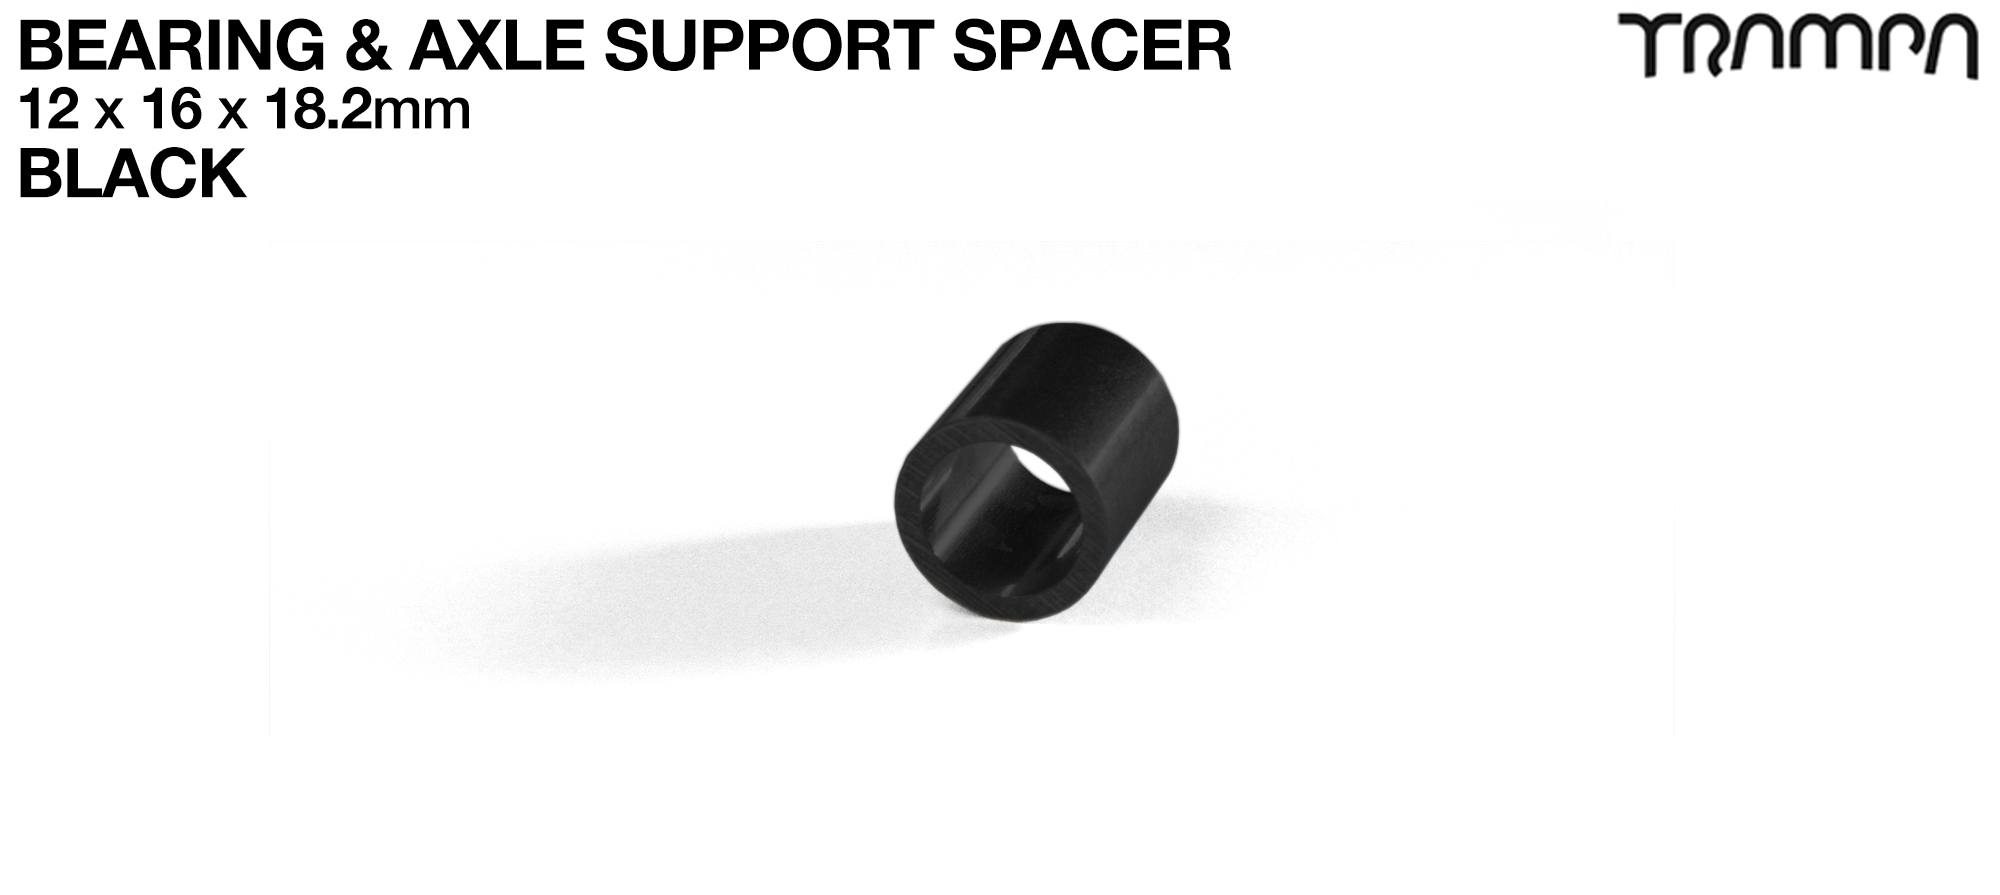 18.2mm Wheel Support Axle Spacers - BLACK x2